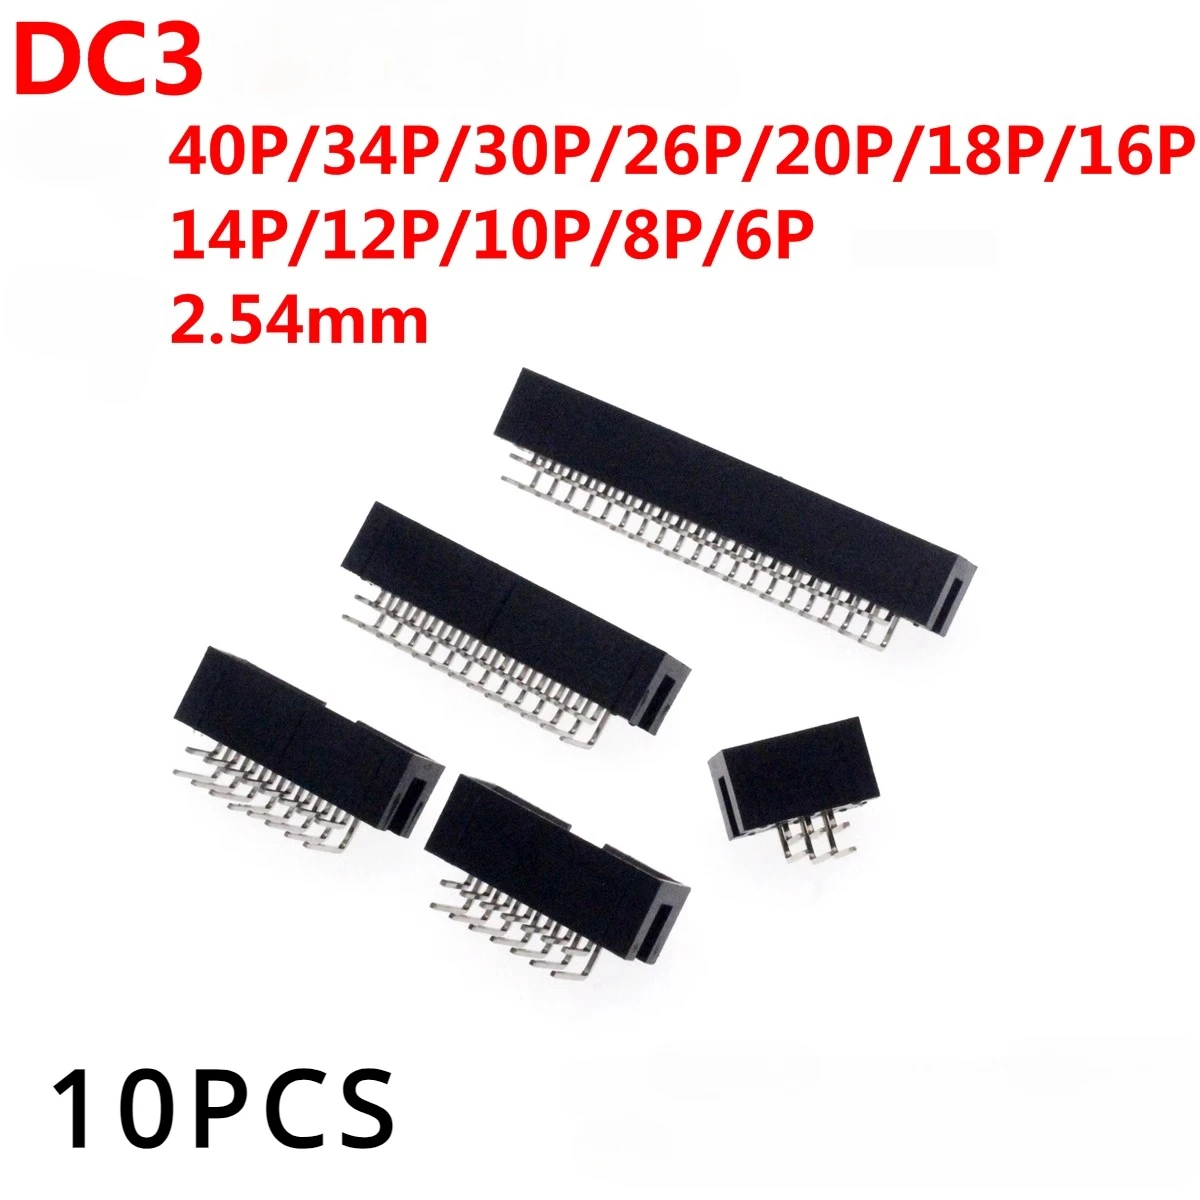 

10Pcs DC3 2.54mm Socket Header Connector ISP Male Double-spaced Straight needle Curved needle 6P/8P/10P/14P/16P/20P/30P/34P/40P